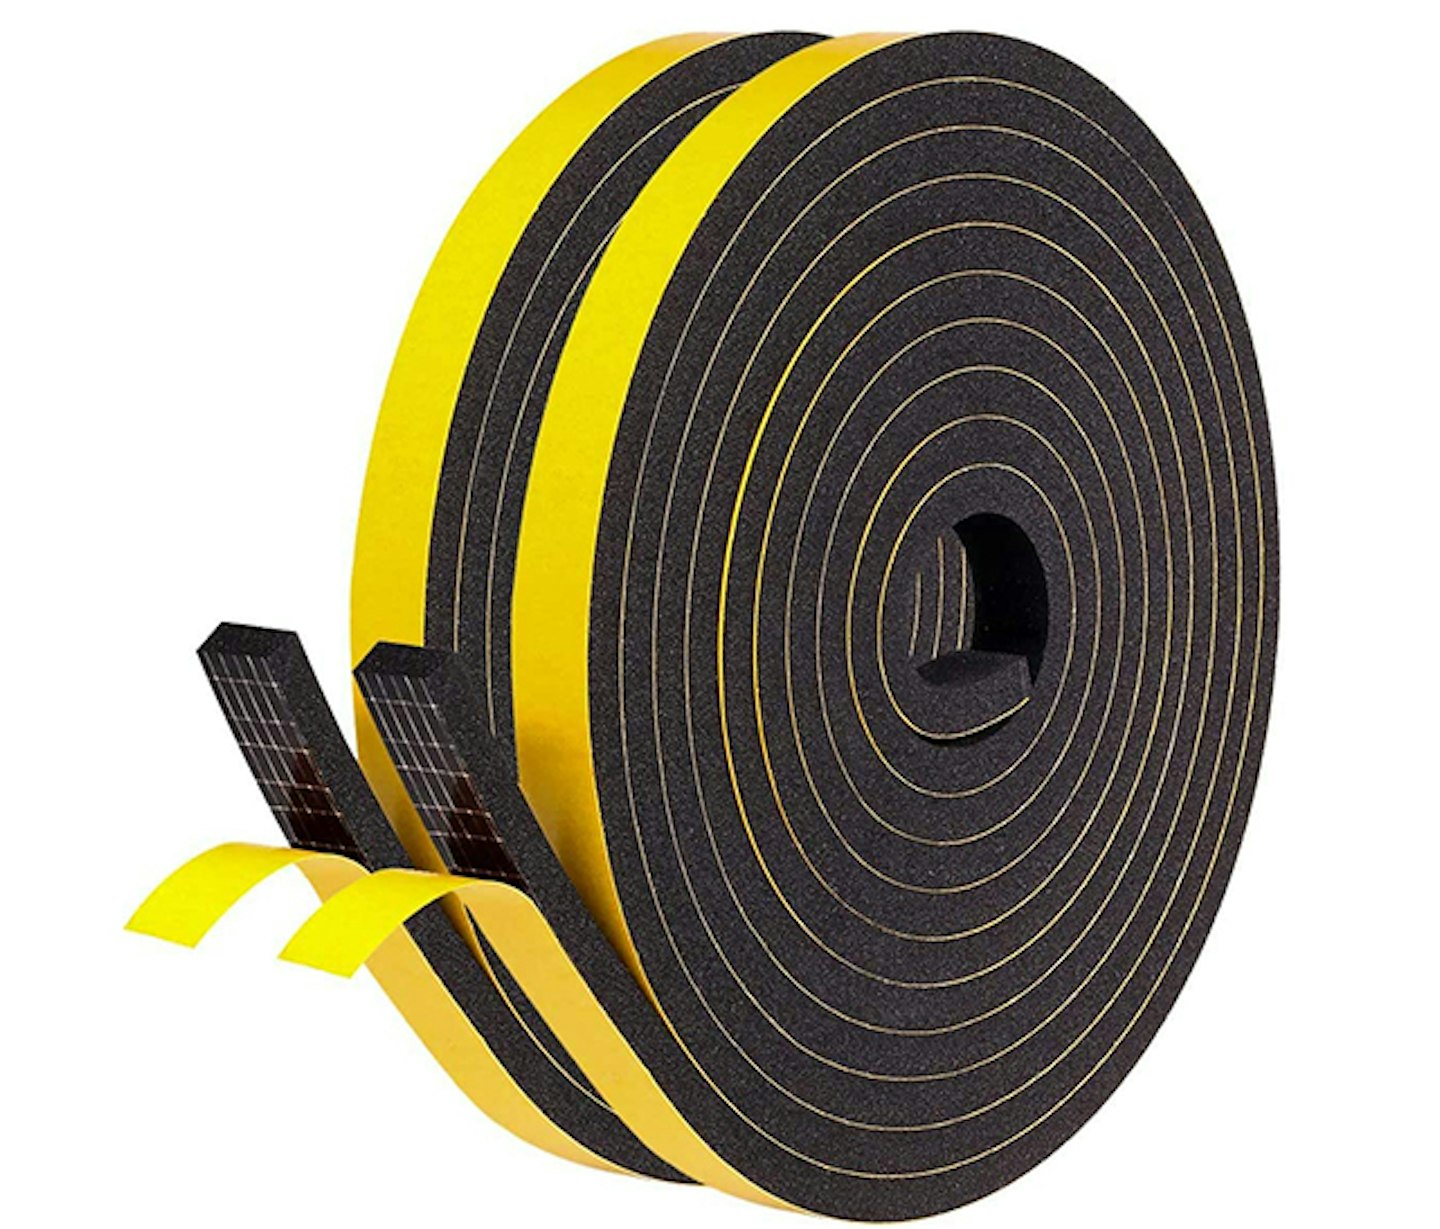 Seal foam draught excluder tape